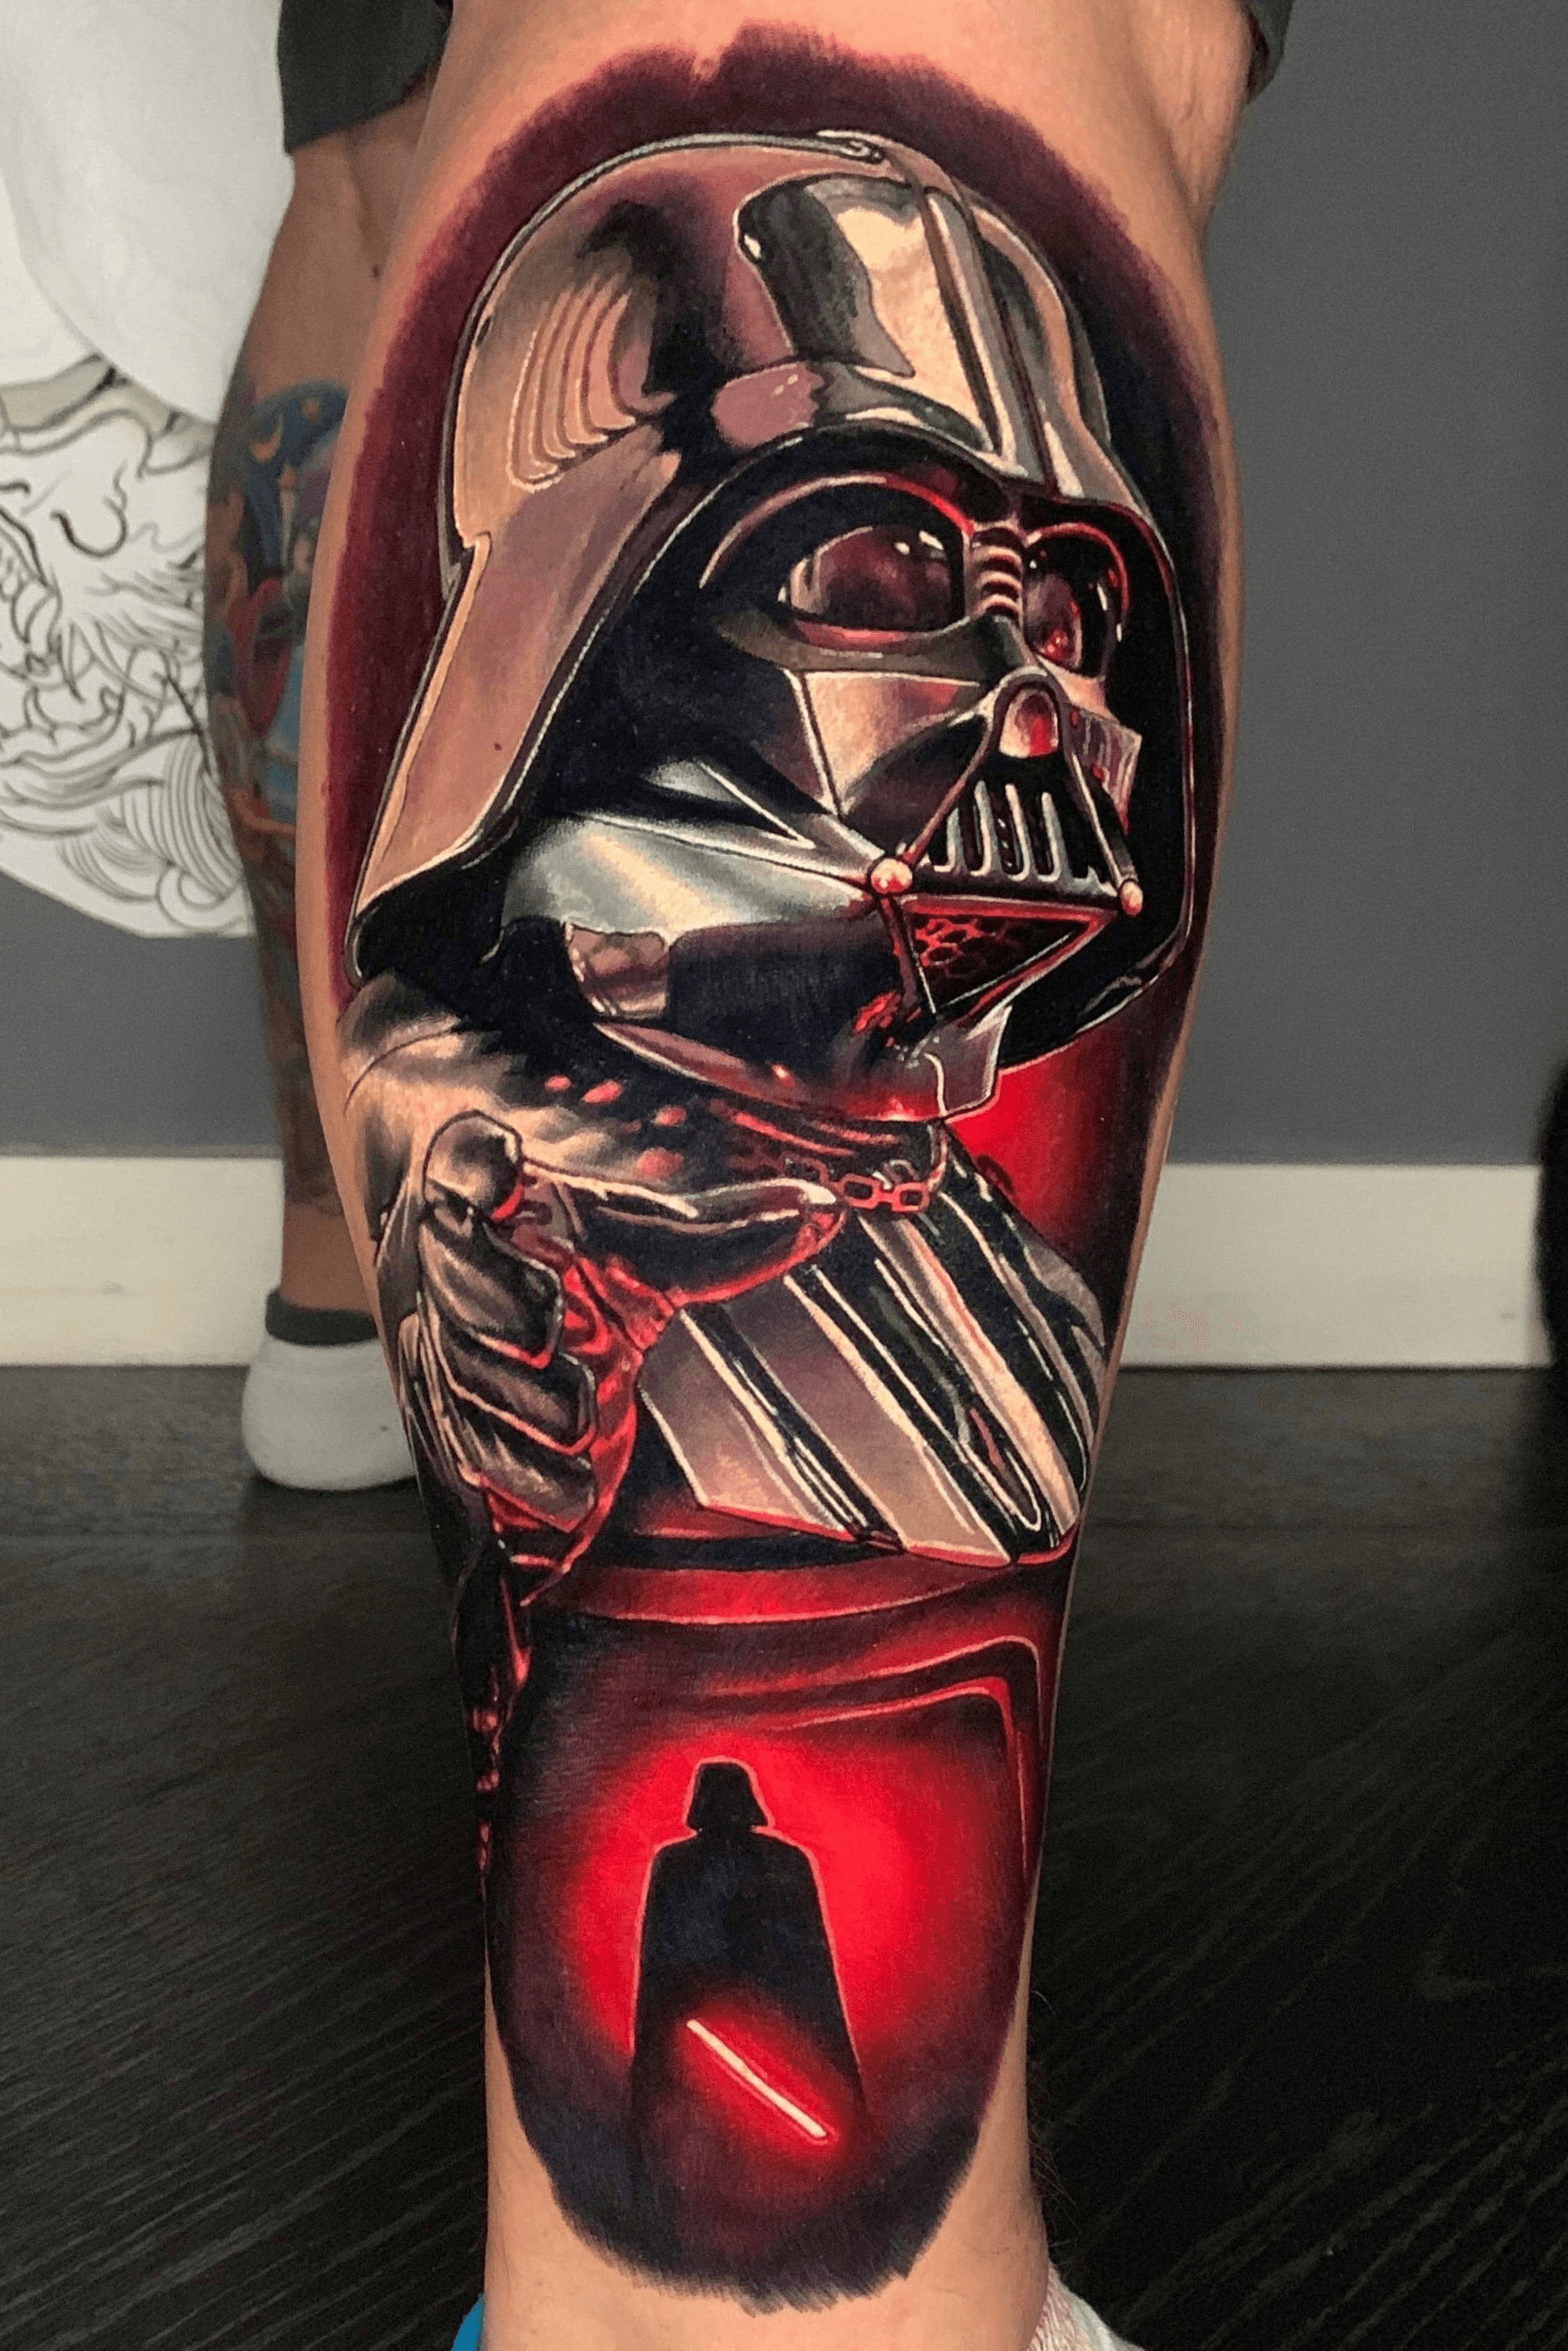 10 Best Star Wars Tattoos That Wont Cost an Arm and a Leg